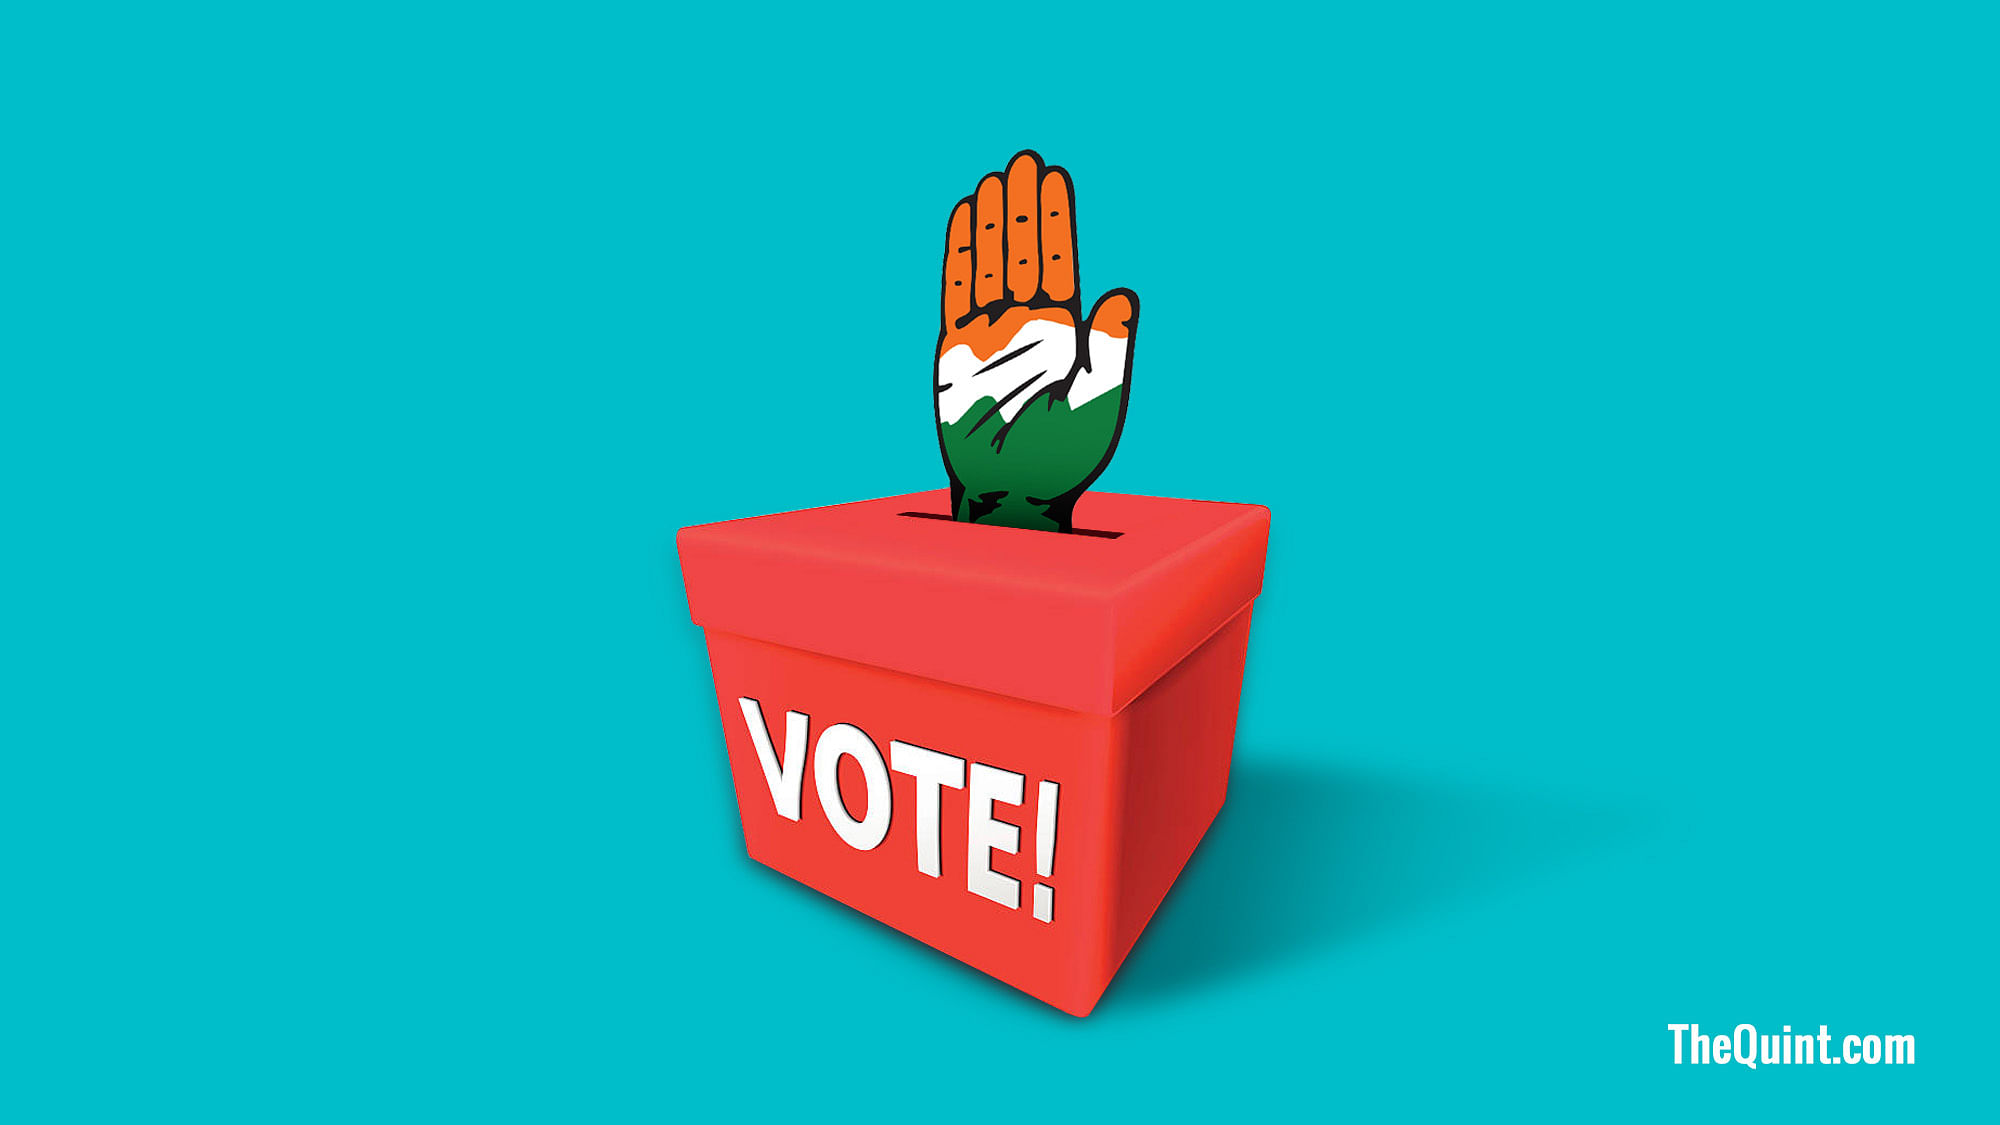 As the aspirational voter gets disillusioned with Modi, Congress can woo them with a masterplan before 2019 polls.